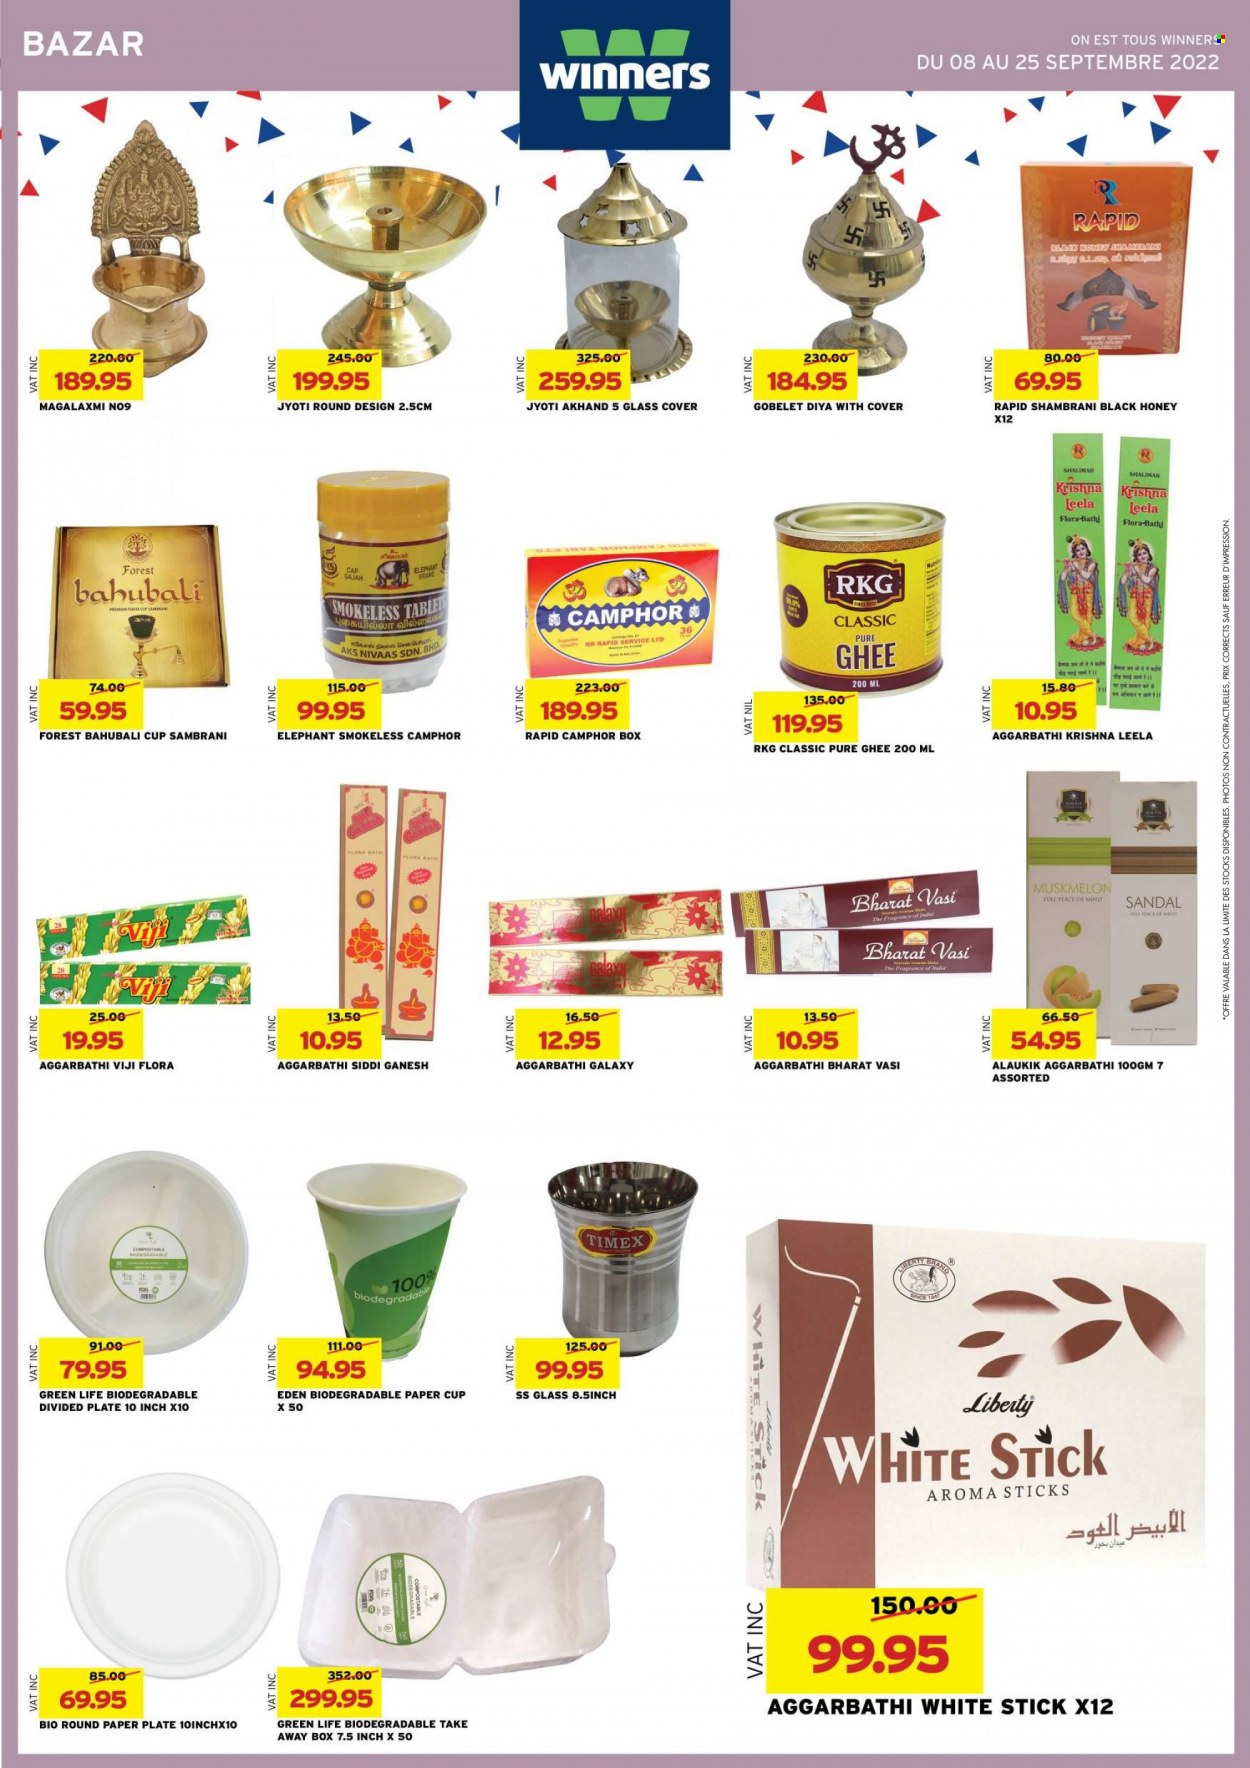 thumbnail - Winner's Catalogue - 8.09.2022 - 25.09.2022 - Sales products - ghee, Flora, honey, fragrance, plate, cup, paper plate, party cups. Page 33.